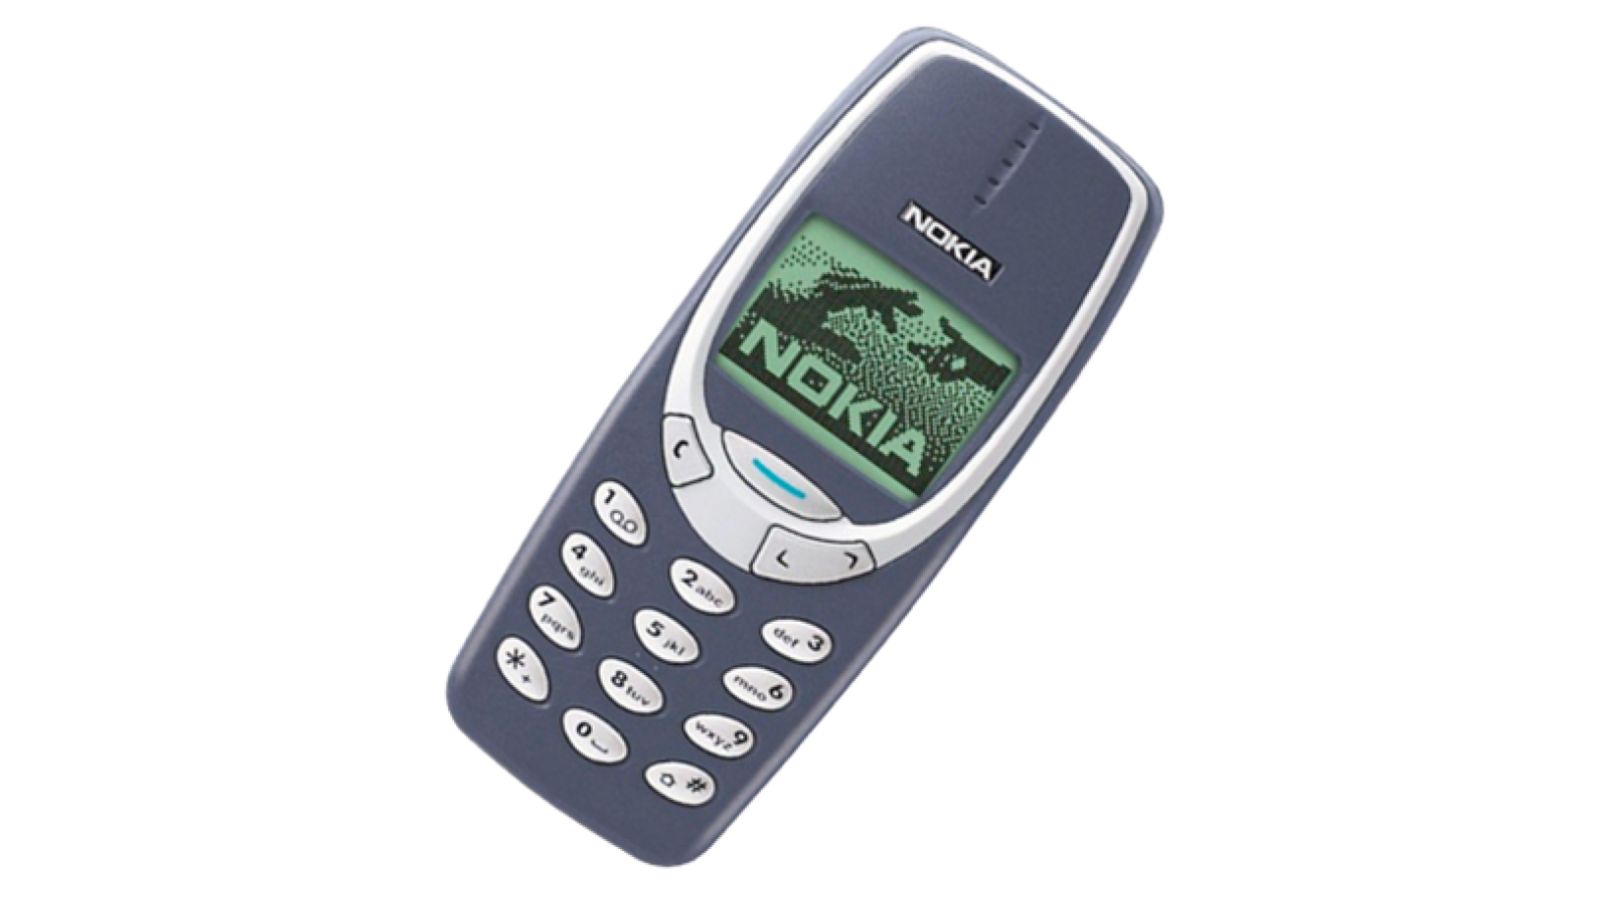 android, hmd reportedly working a modern version of the iconic nokia 3210